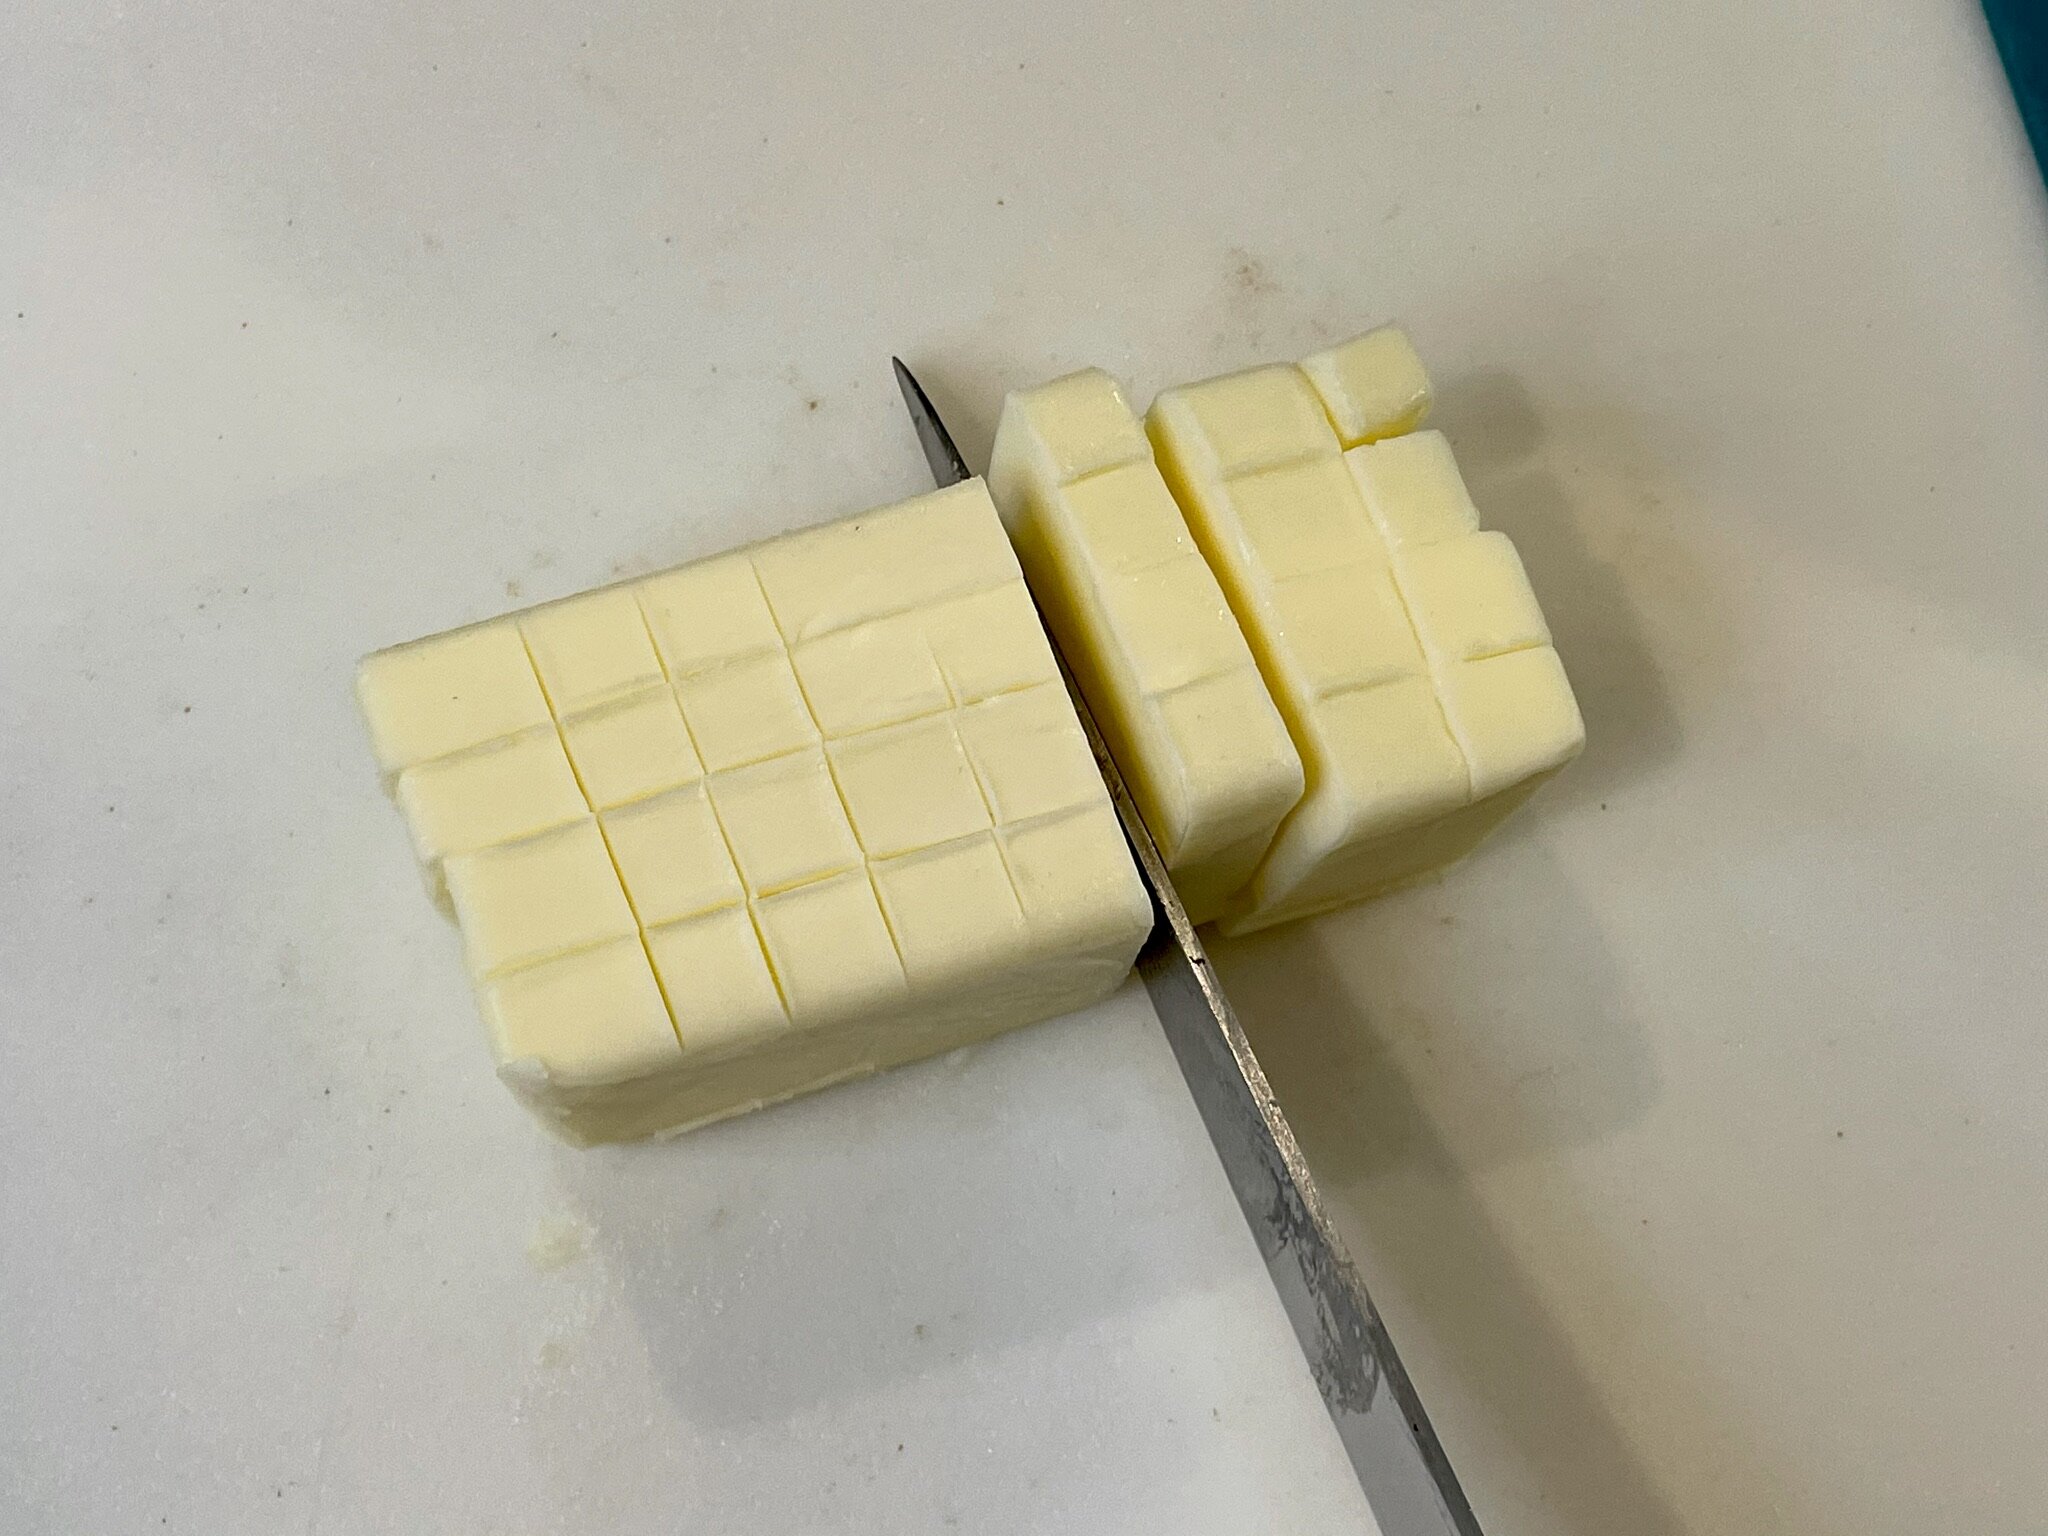 Cut butter into small cubes.